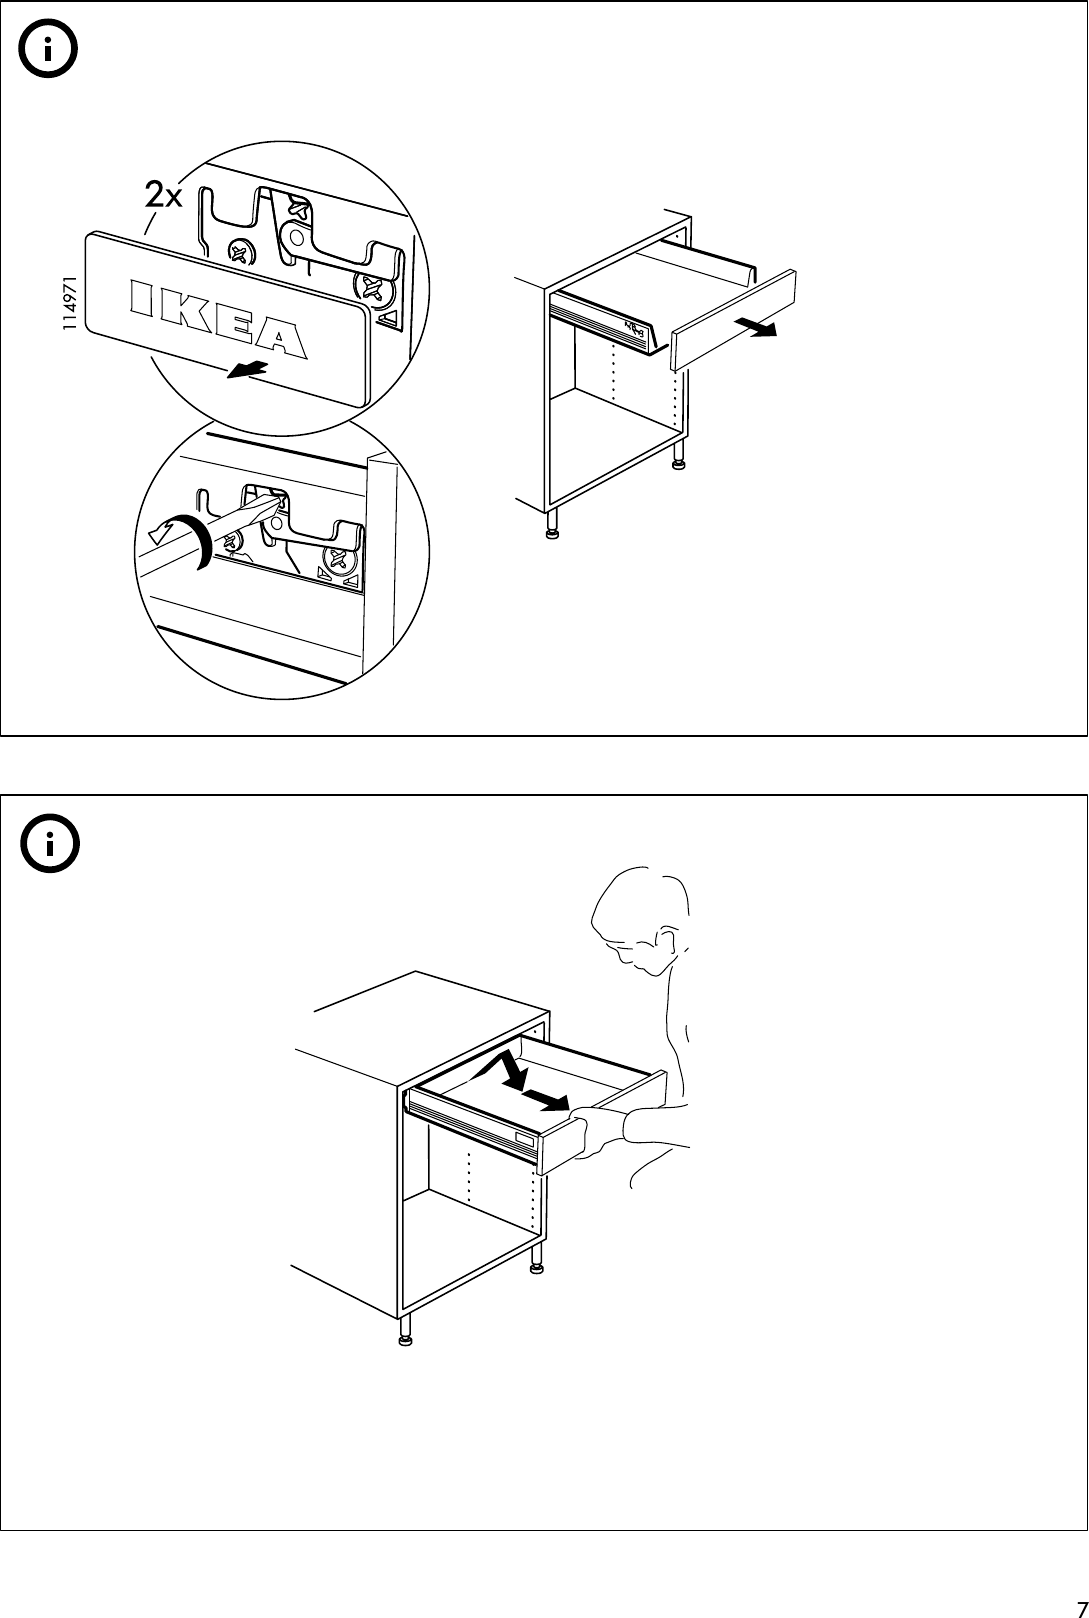 Page 7 of 8 - Ikea Ikea-Rationell-Full-Extending-Drawer-15-Assembly-Instruction